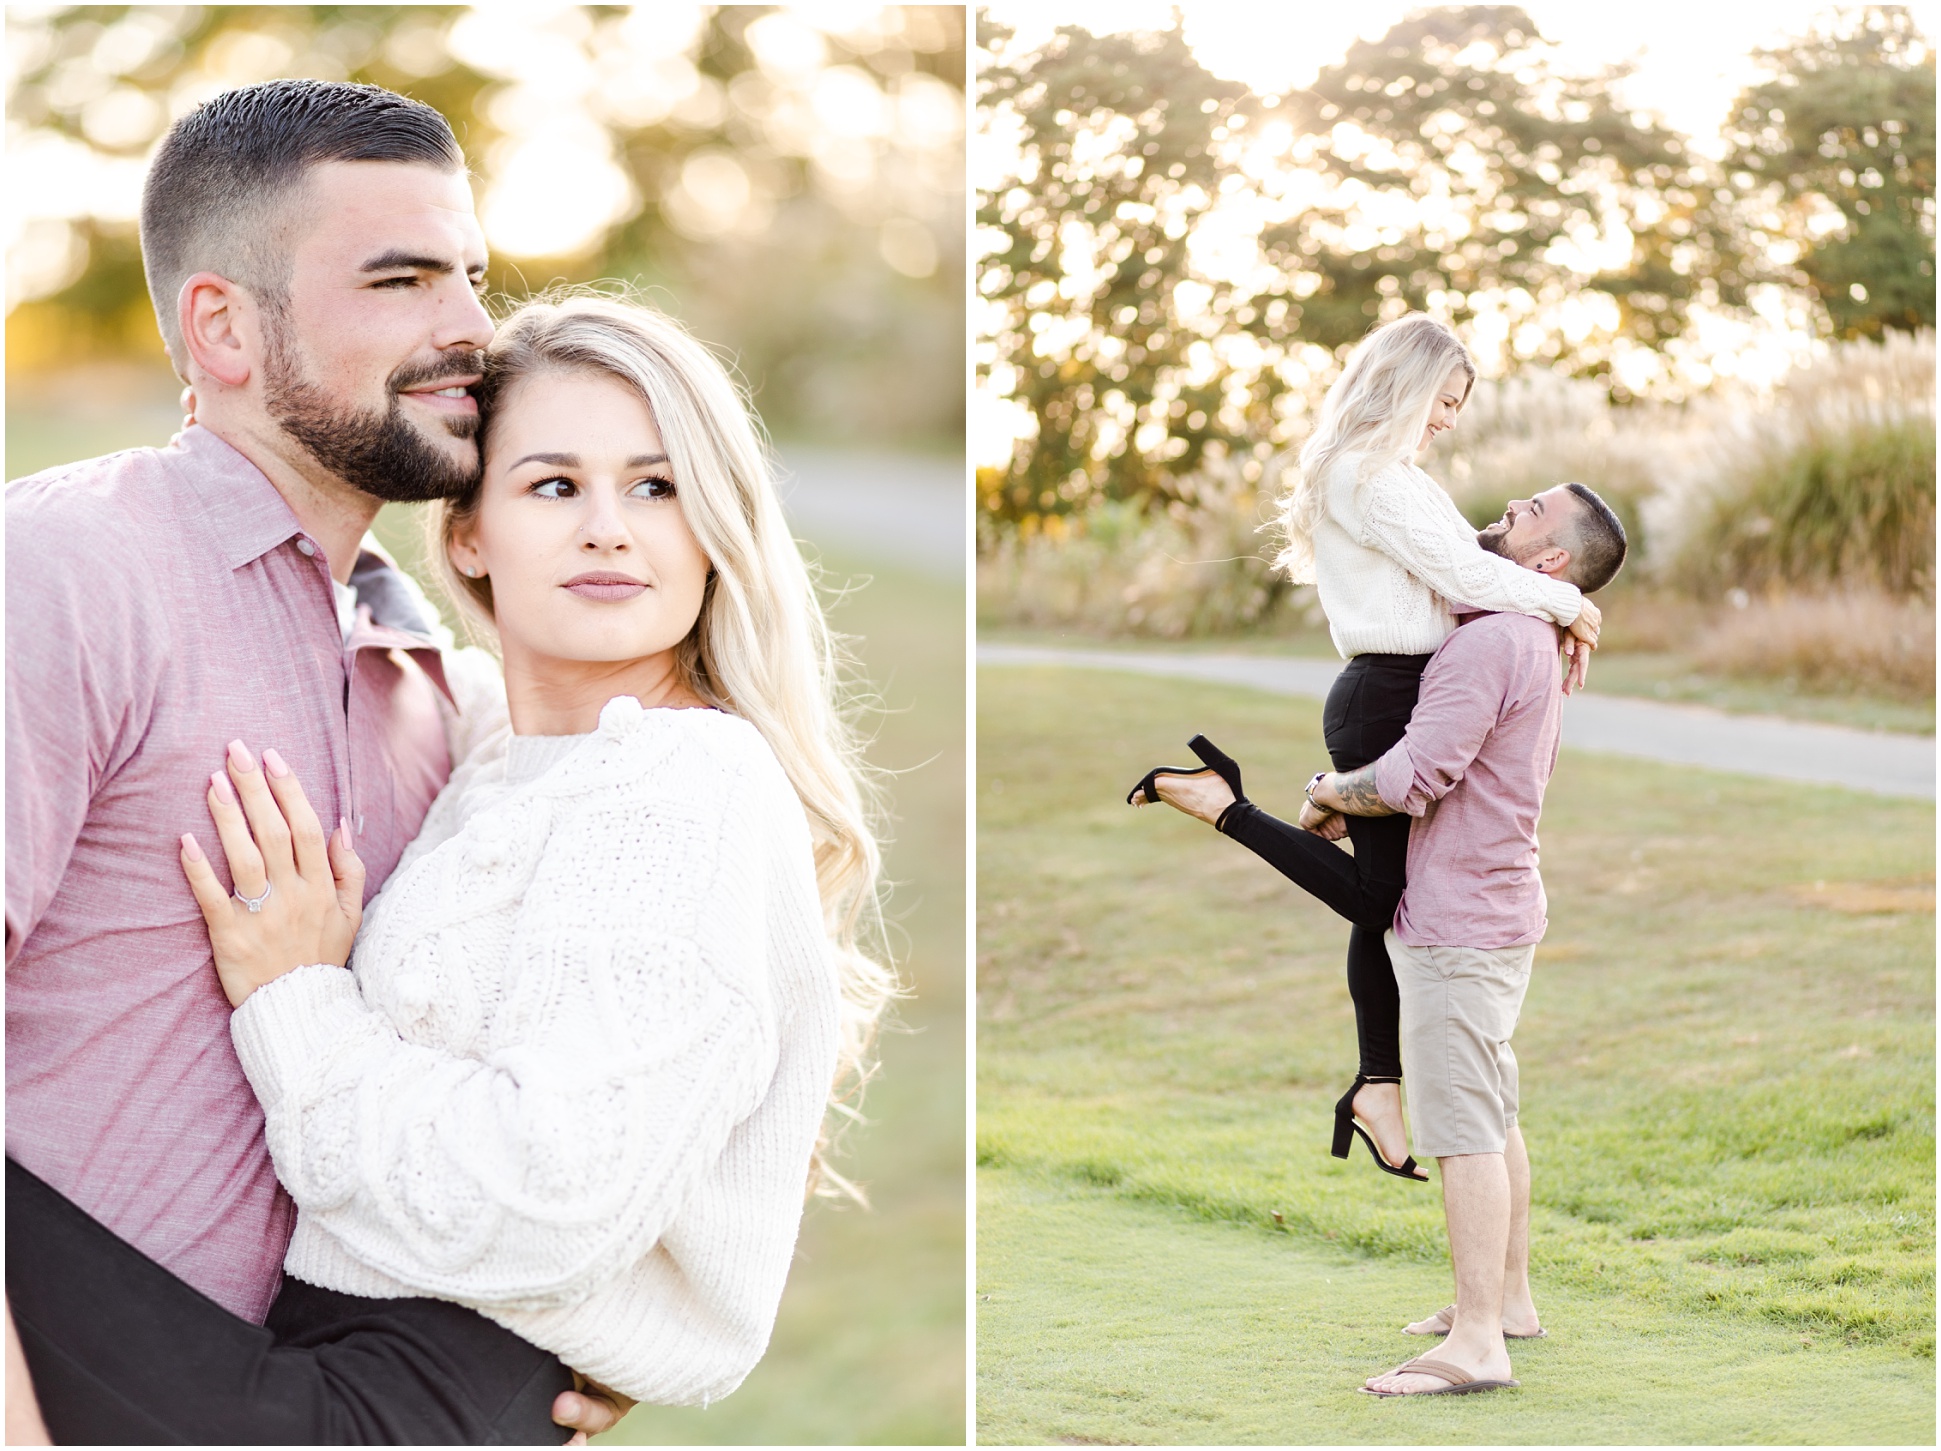 Two images from an engagement session on Greystone Golfcourse